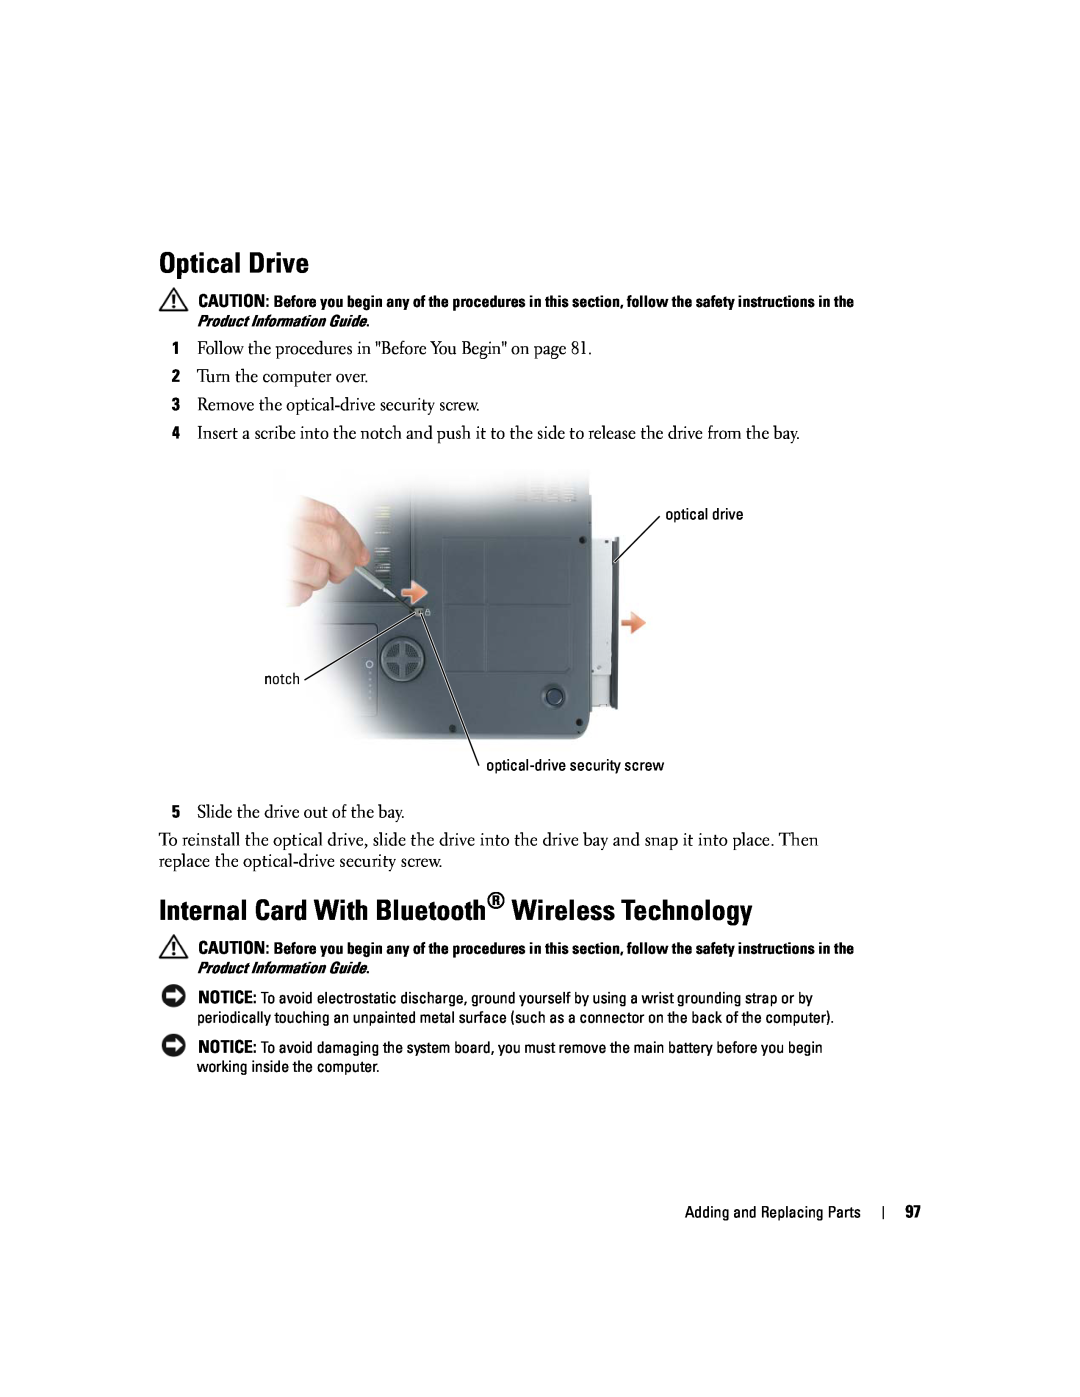 Dell 9300 owner manual Optical Drive, Internal Card With Bluetooth Wireless Technology 